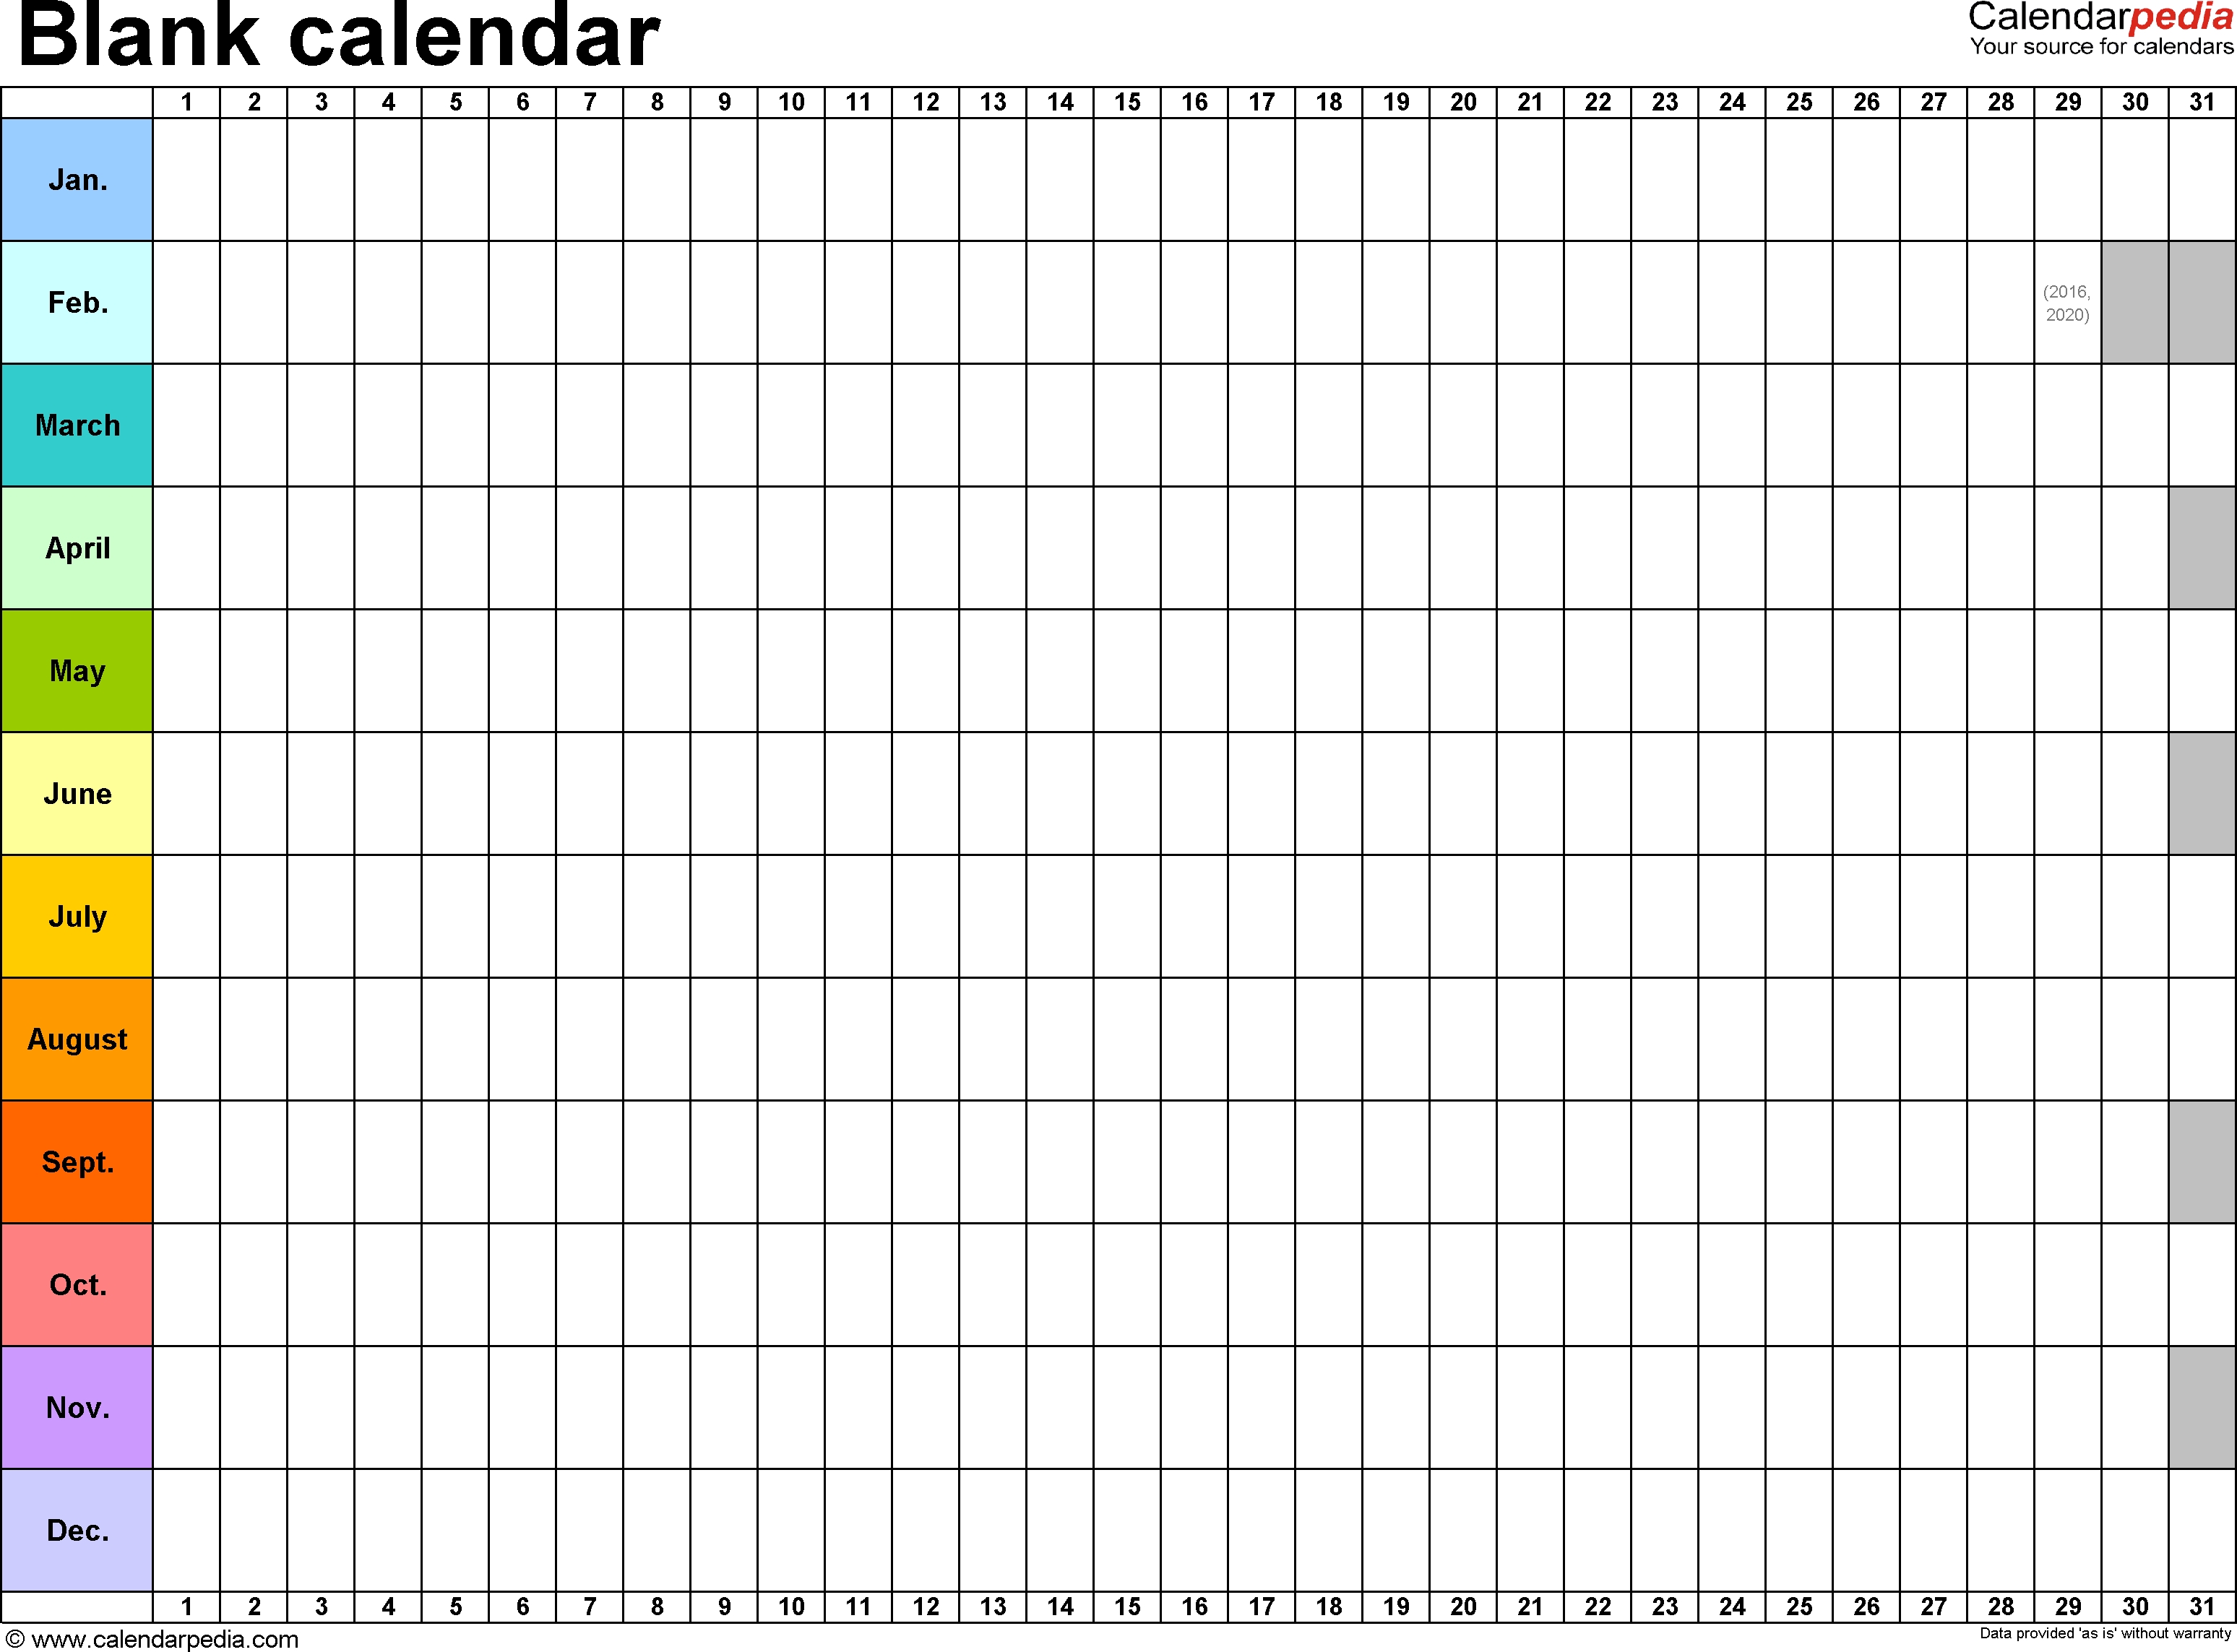 Blank Calendar - 9 Free Printable Microsoft Word Templates Calendar Template To Fill In And Print